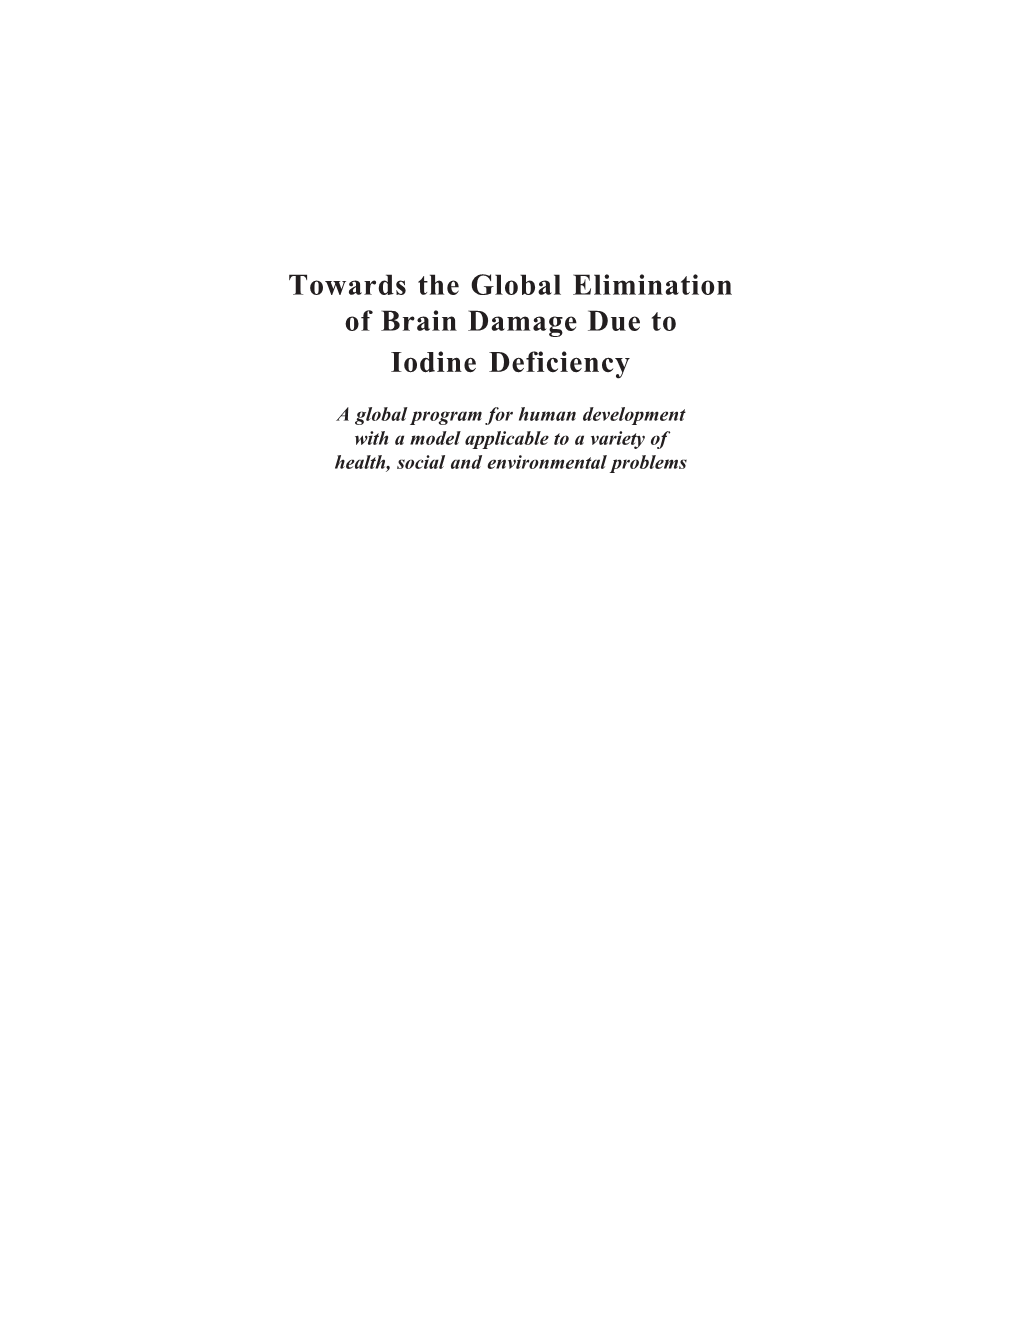 Towards the Global Elimination of Brain Damage Due to Iodine Deficiency